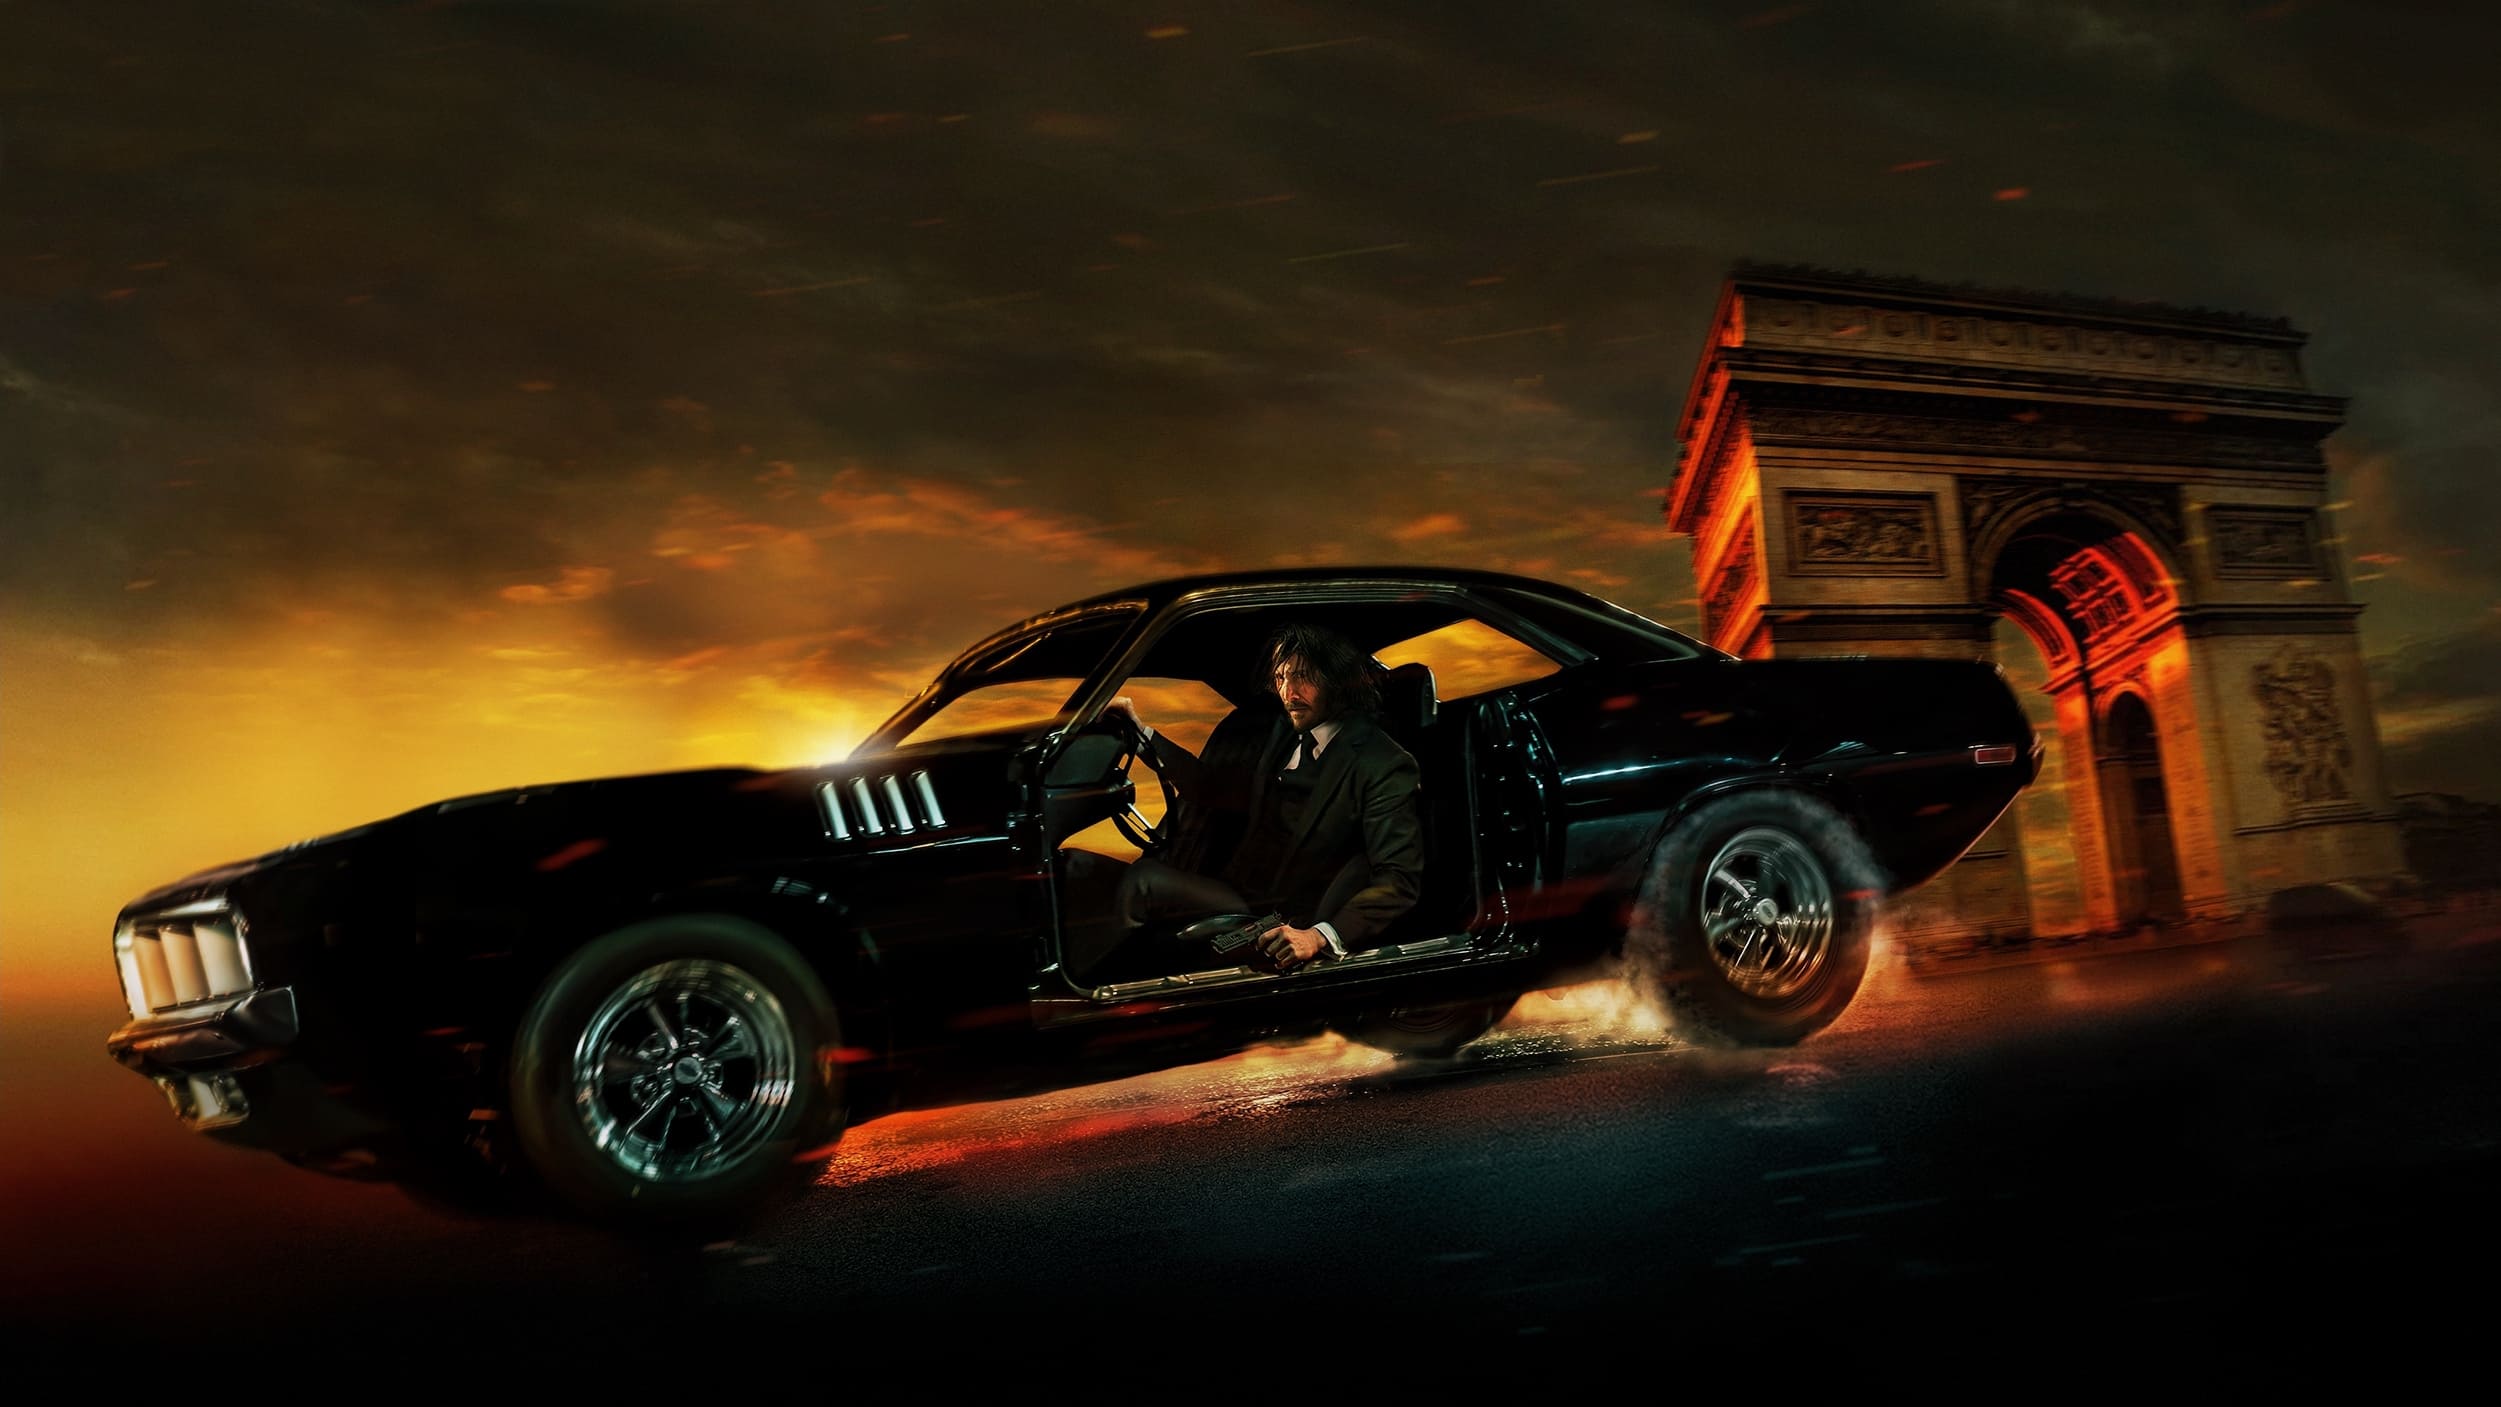 John Wick in his American Muscle Car sans doors in the middle of a car chase action scene. A still shot from the movie John Wick: Chapter 4